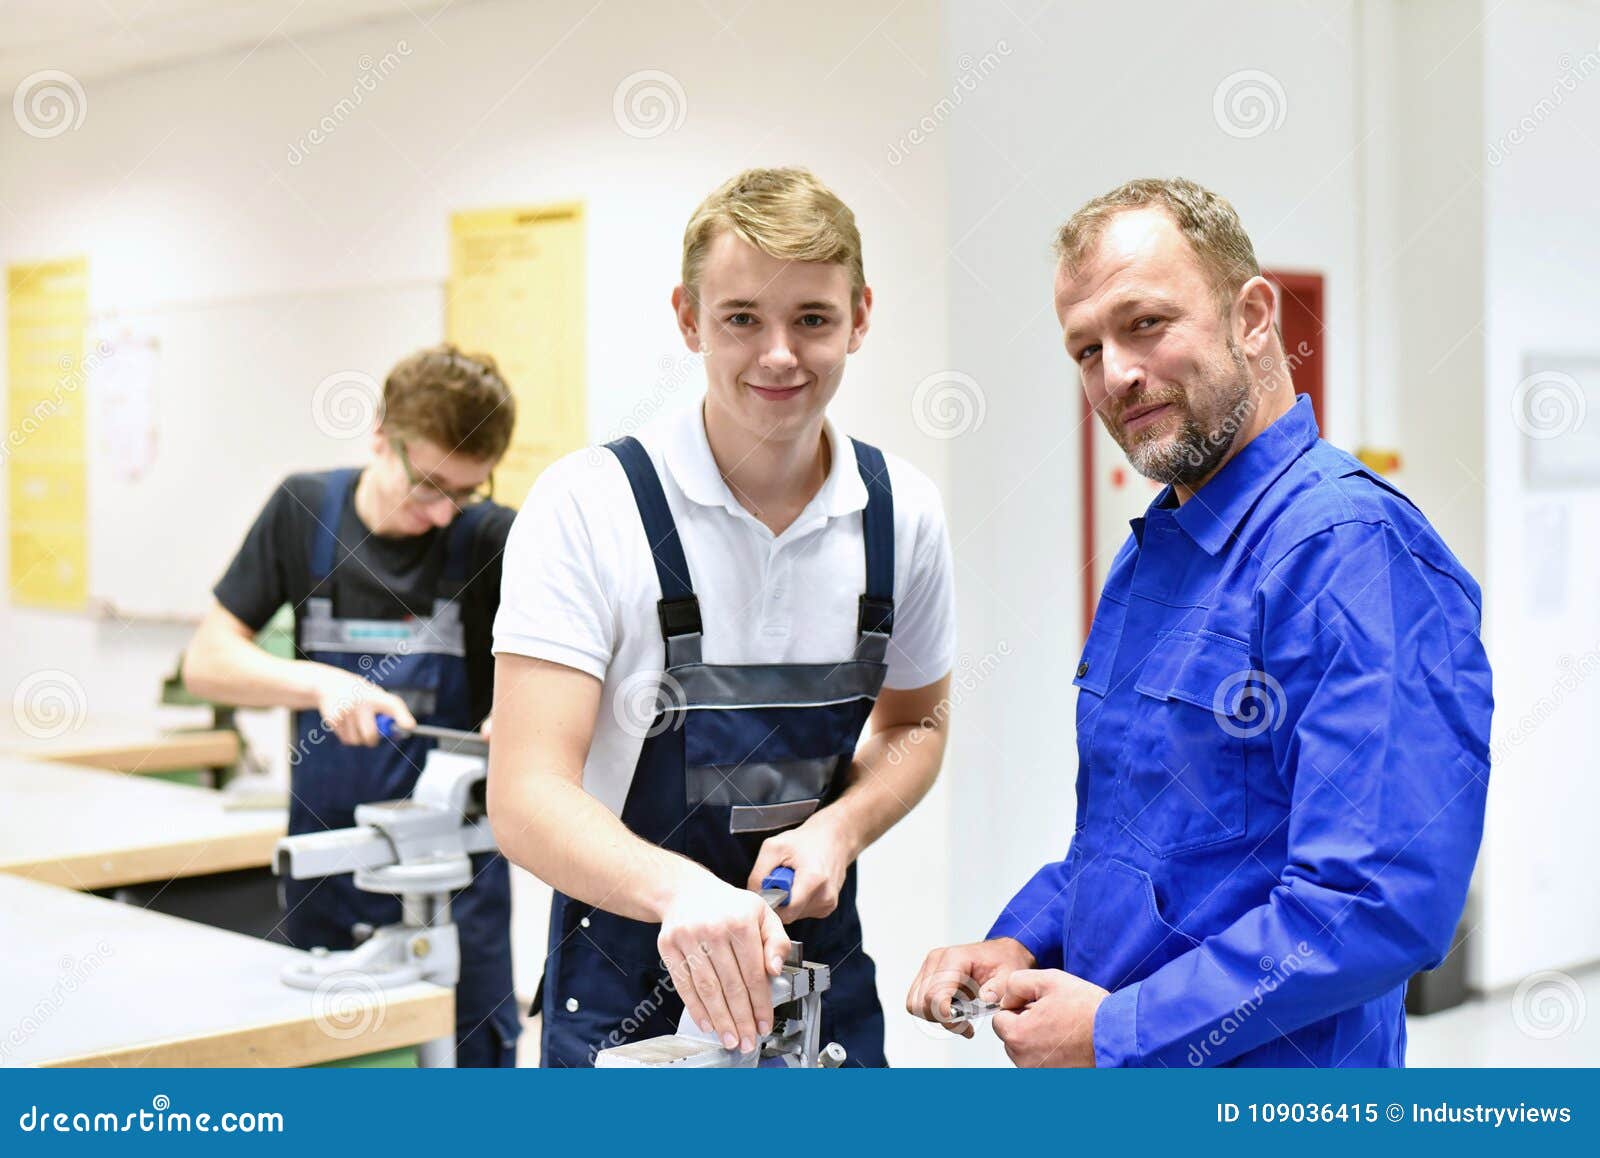 group of young people in technical vocational training with teacher